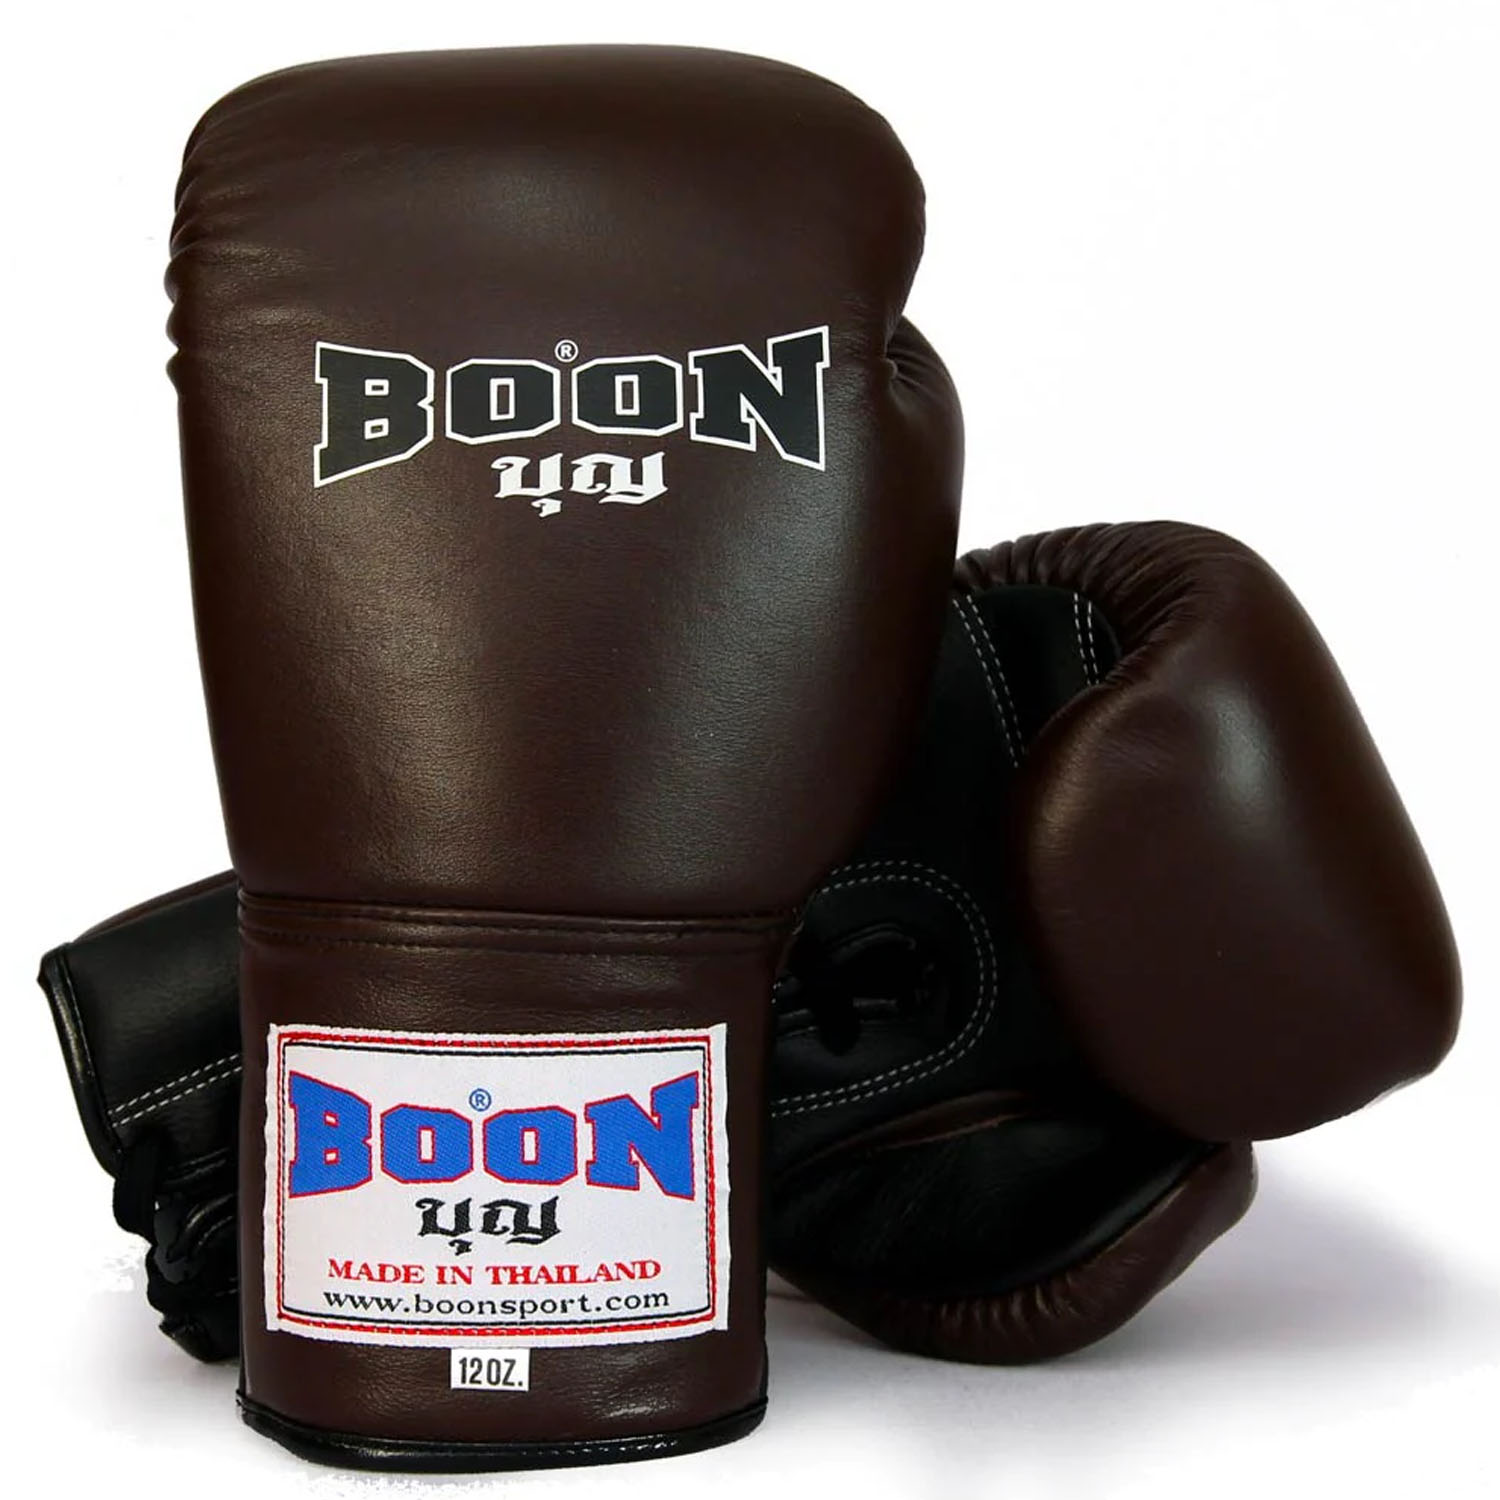 BOON Boxing Gloves, BGLBR, Lace Up, brown-black